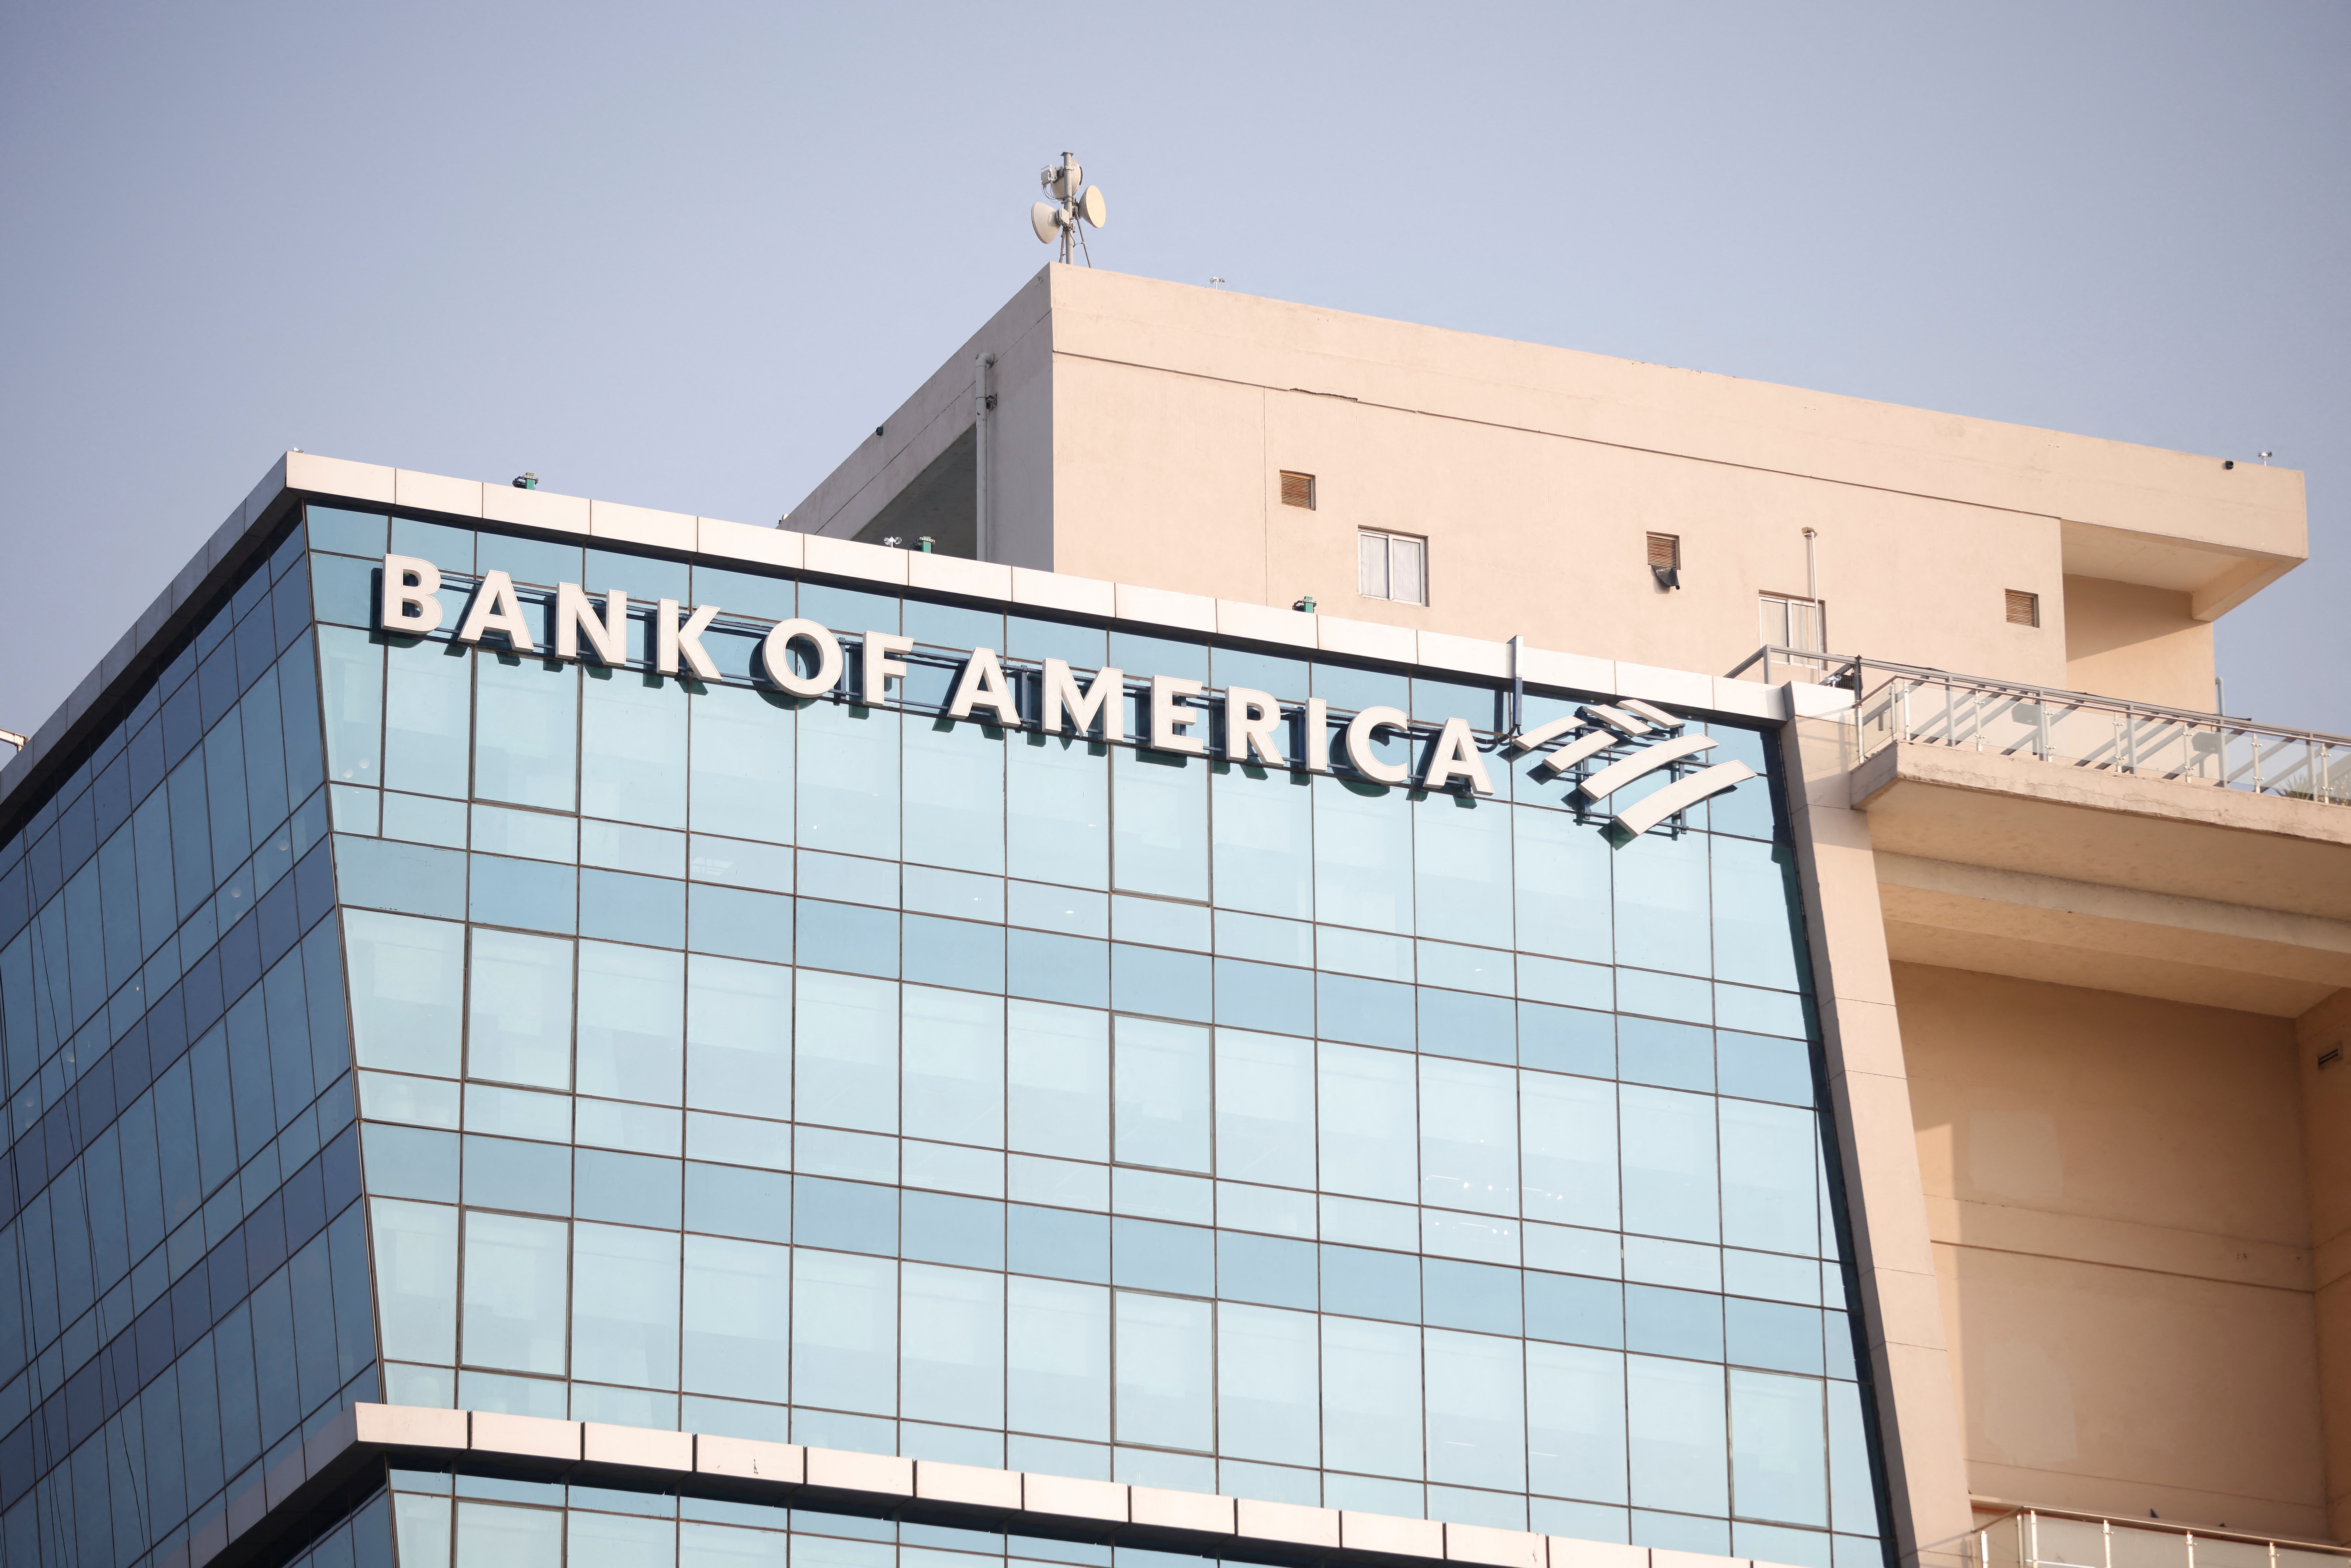 A logo of the Bank of America is seen on an office building at the Gujarat International Finance Tec-City (GIFT) at Gandhinagar